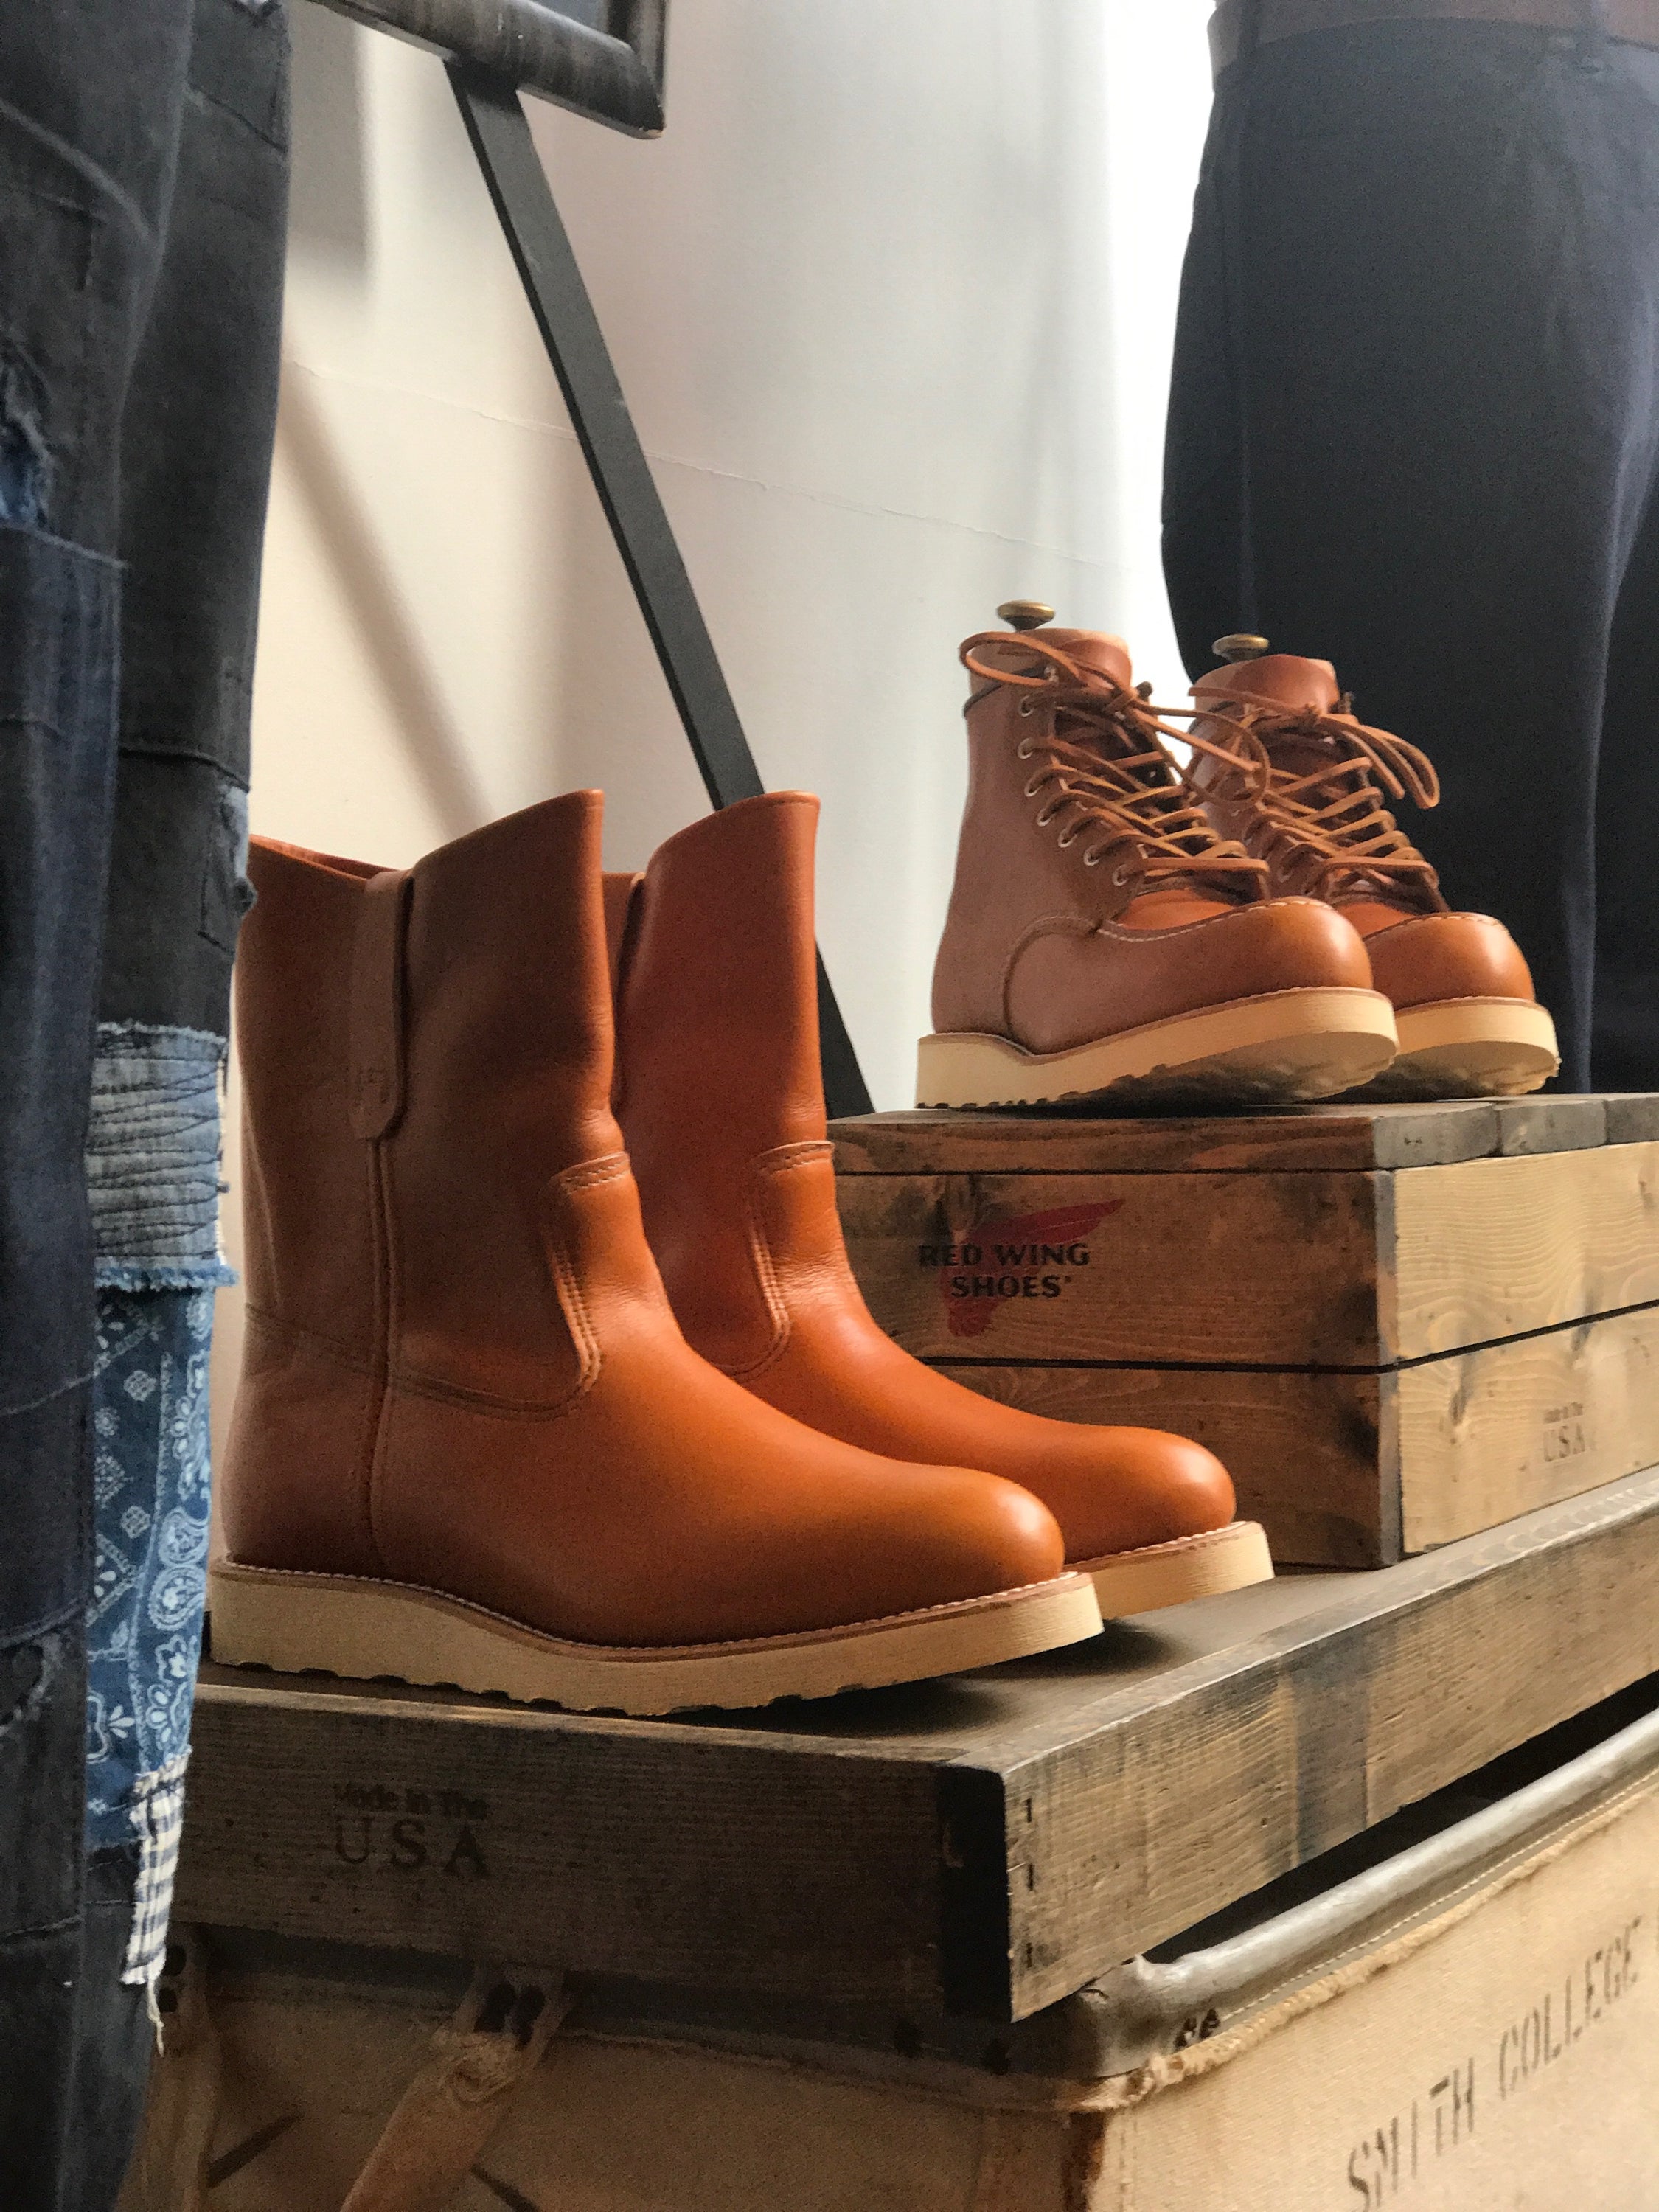 Red Wing Shoes® Irish Setter Launch Event Party - grown&sewn